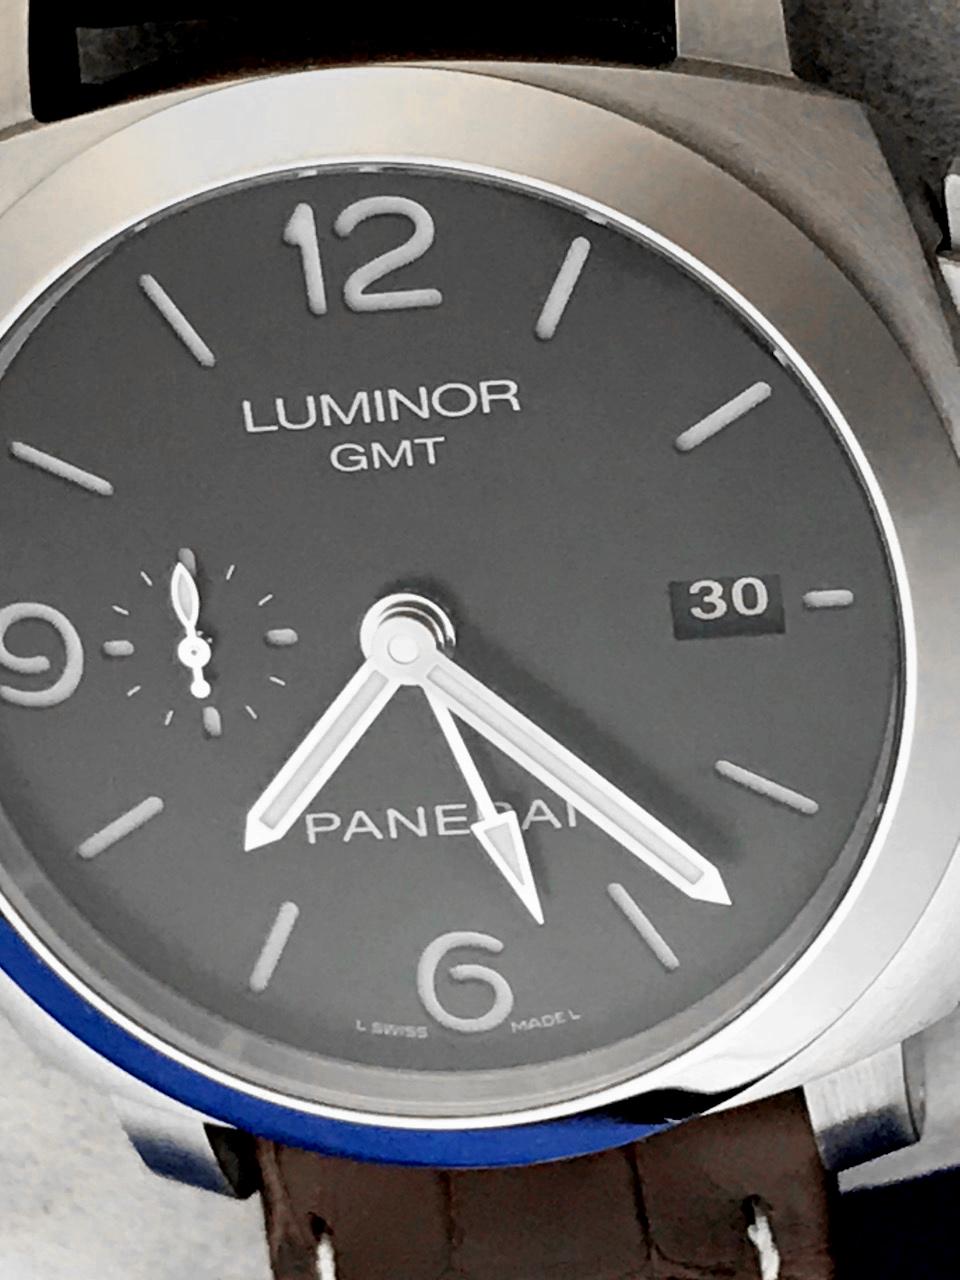 The Panerai Luminor 1950 GMT Limited Edition PAM00320 certified pre-owned automatic men's wrist watch. Limited Series of 1200 Individually Numbered Pieces. Black 